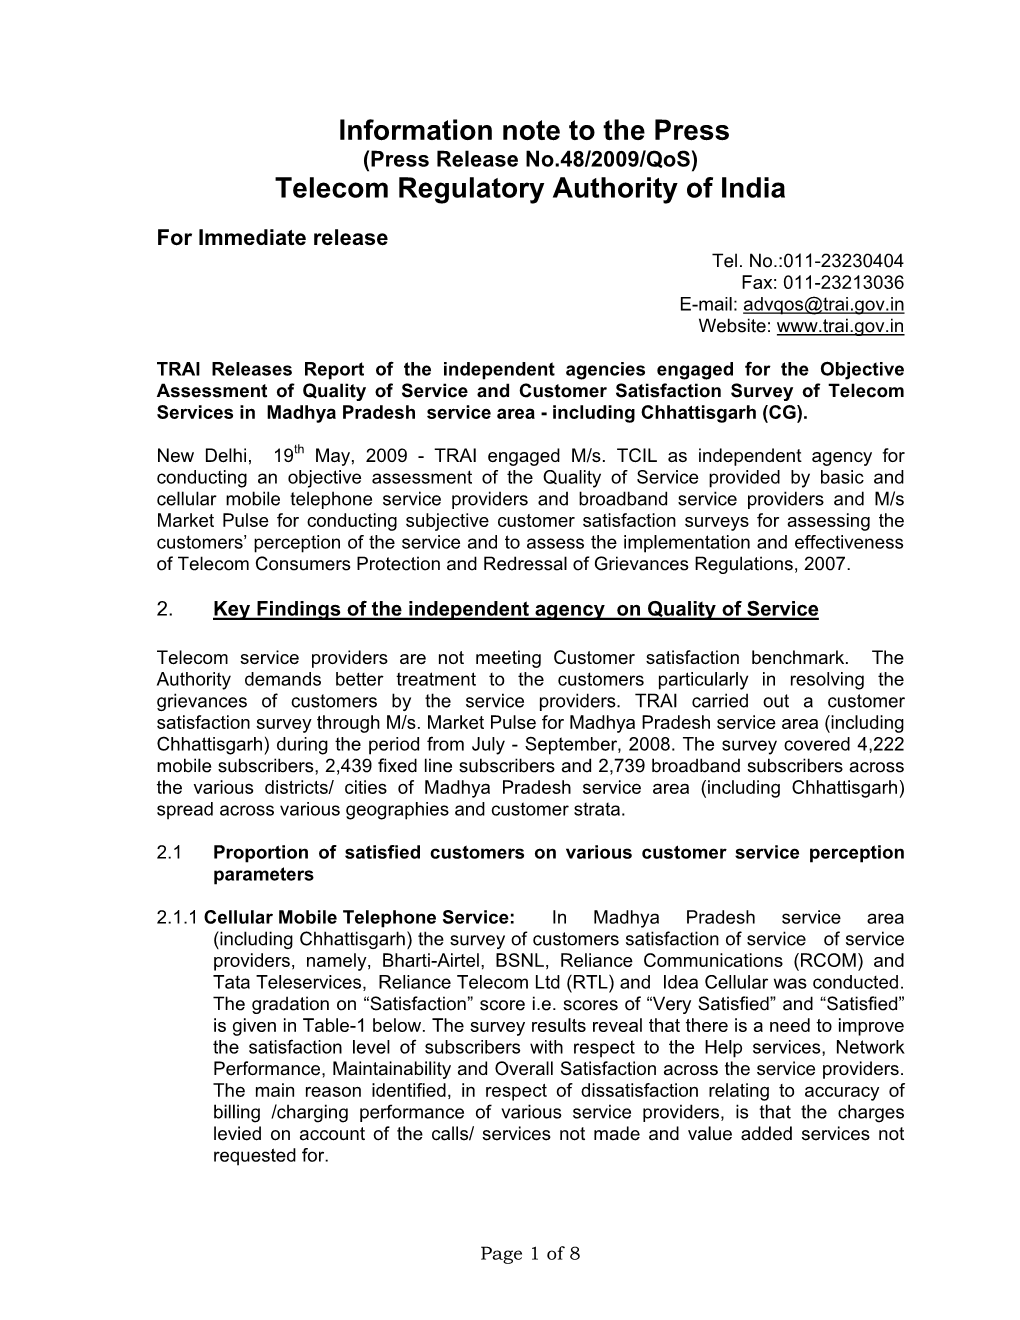 Information Note to the Press Telecom Regulatory Authority of India